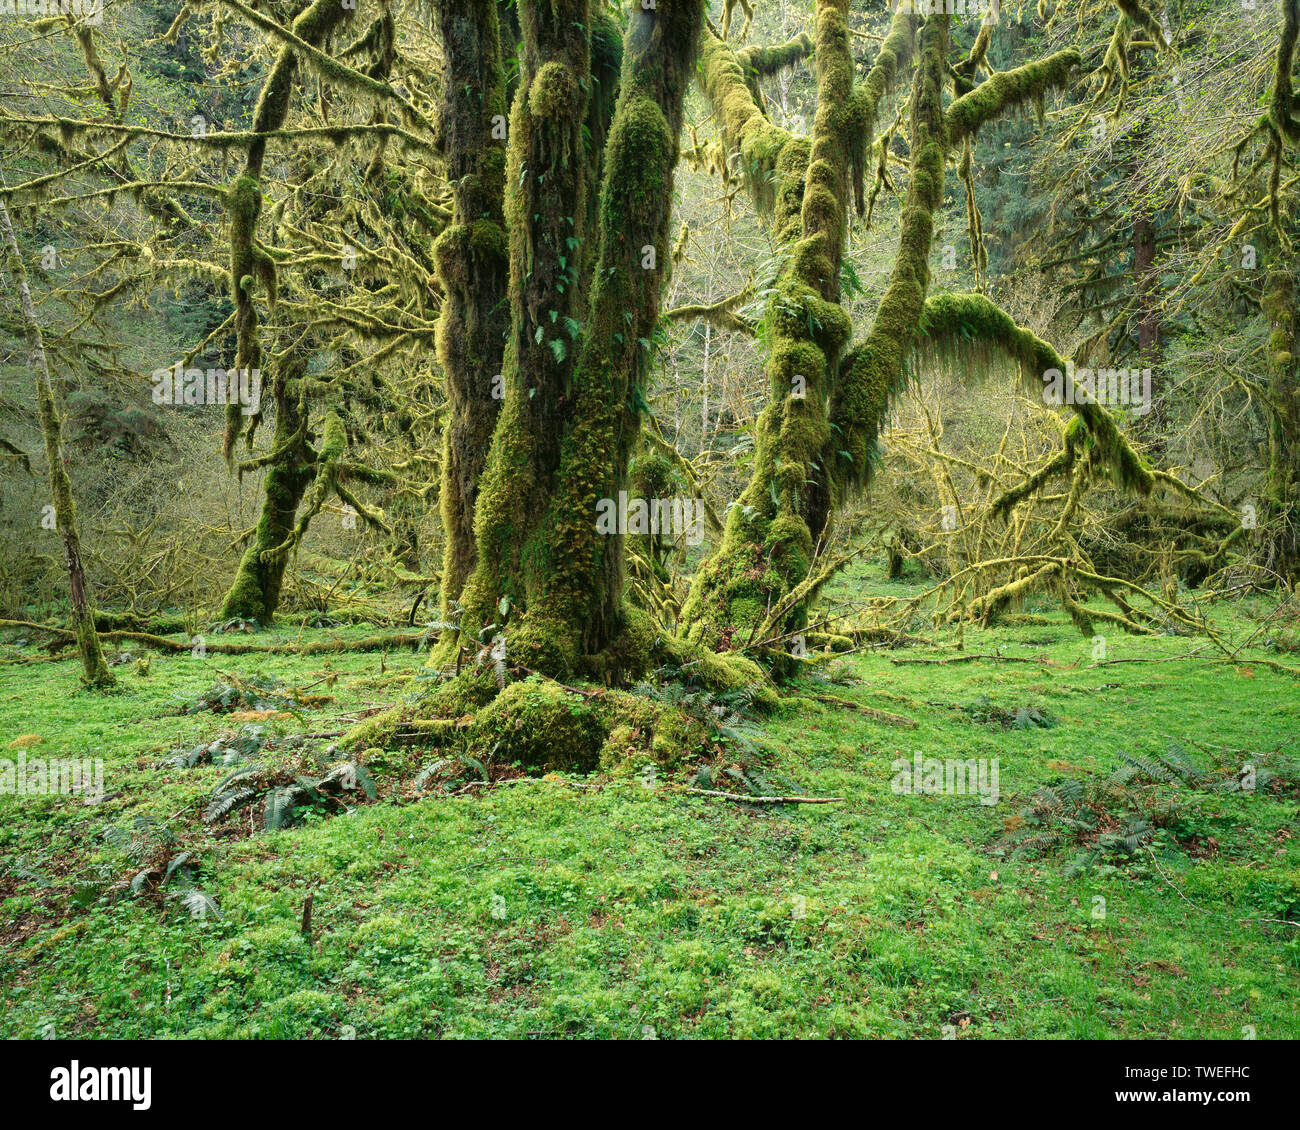 USA, Washington, Olympic National Park, Moss clings to bigleaf maple in spring; Quinault Rain Forest. Stock Photo